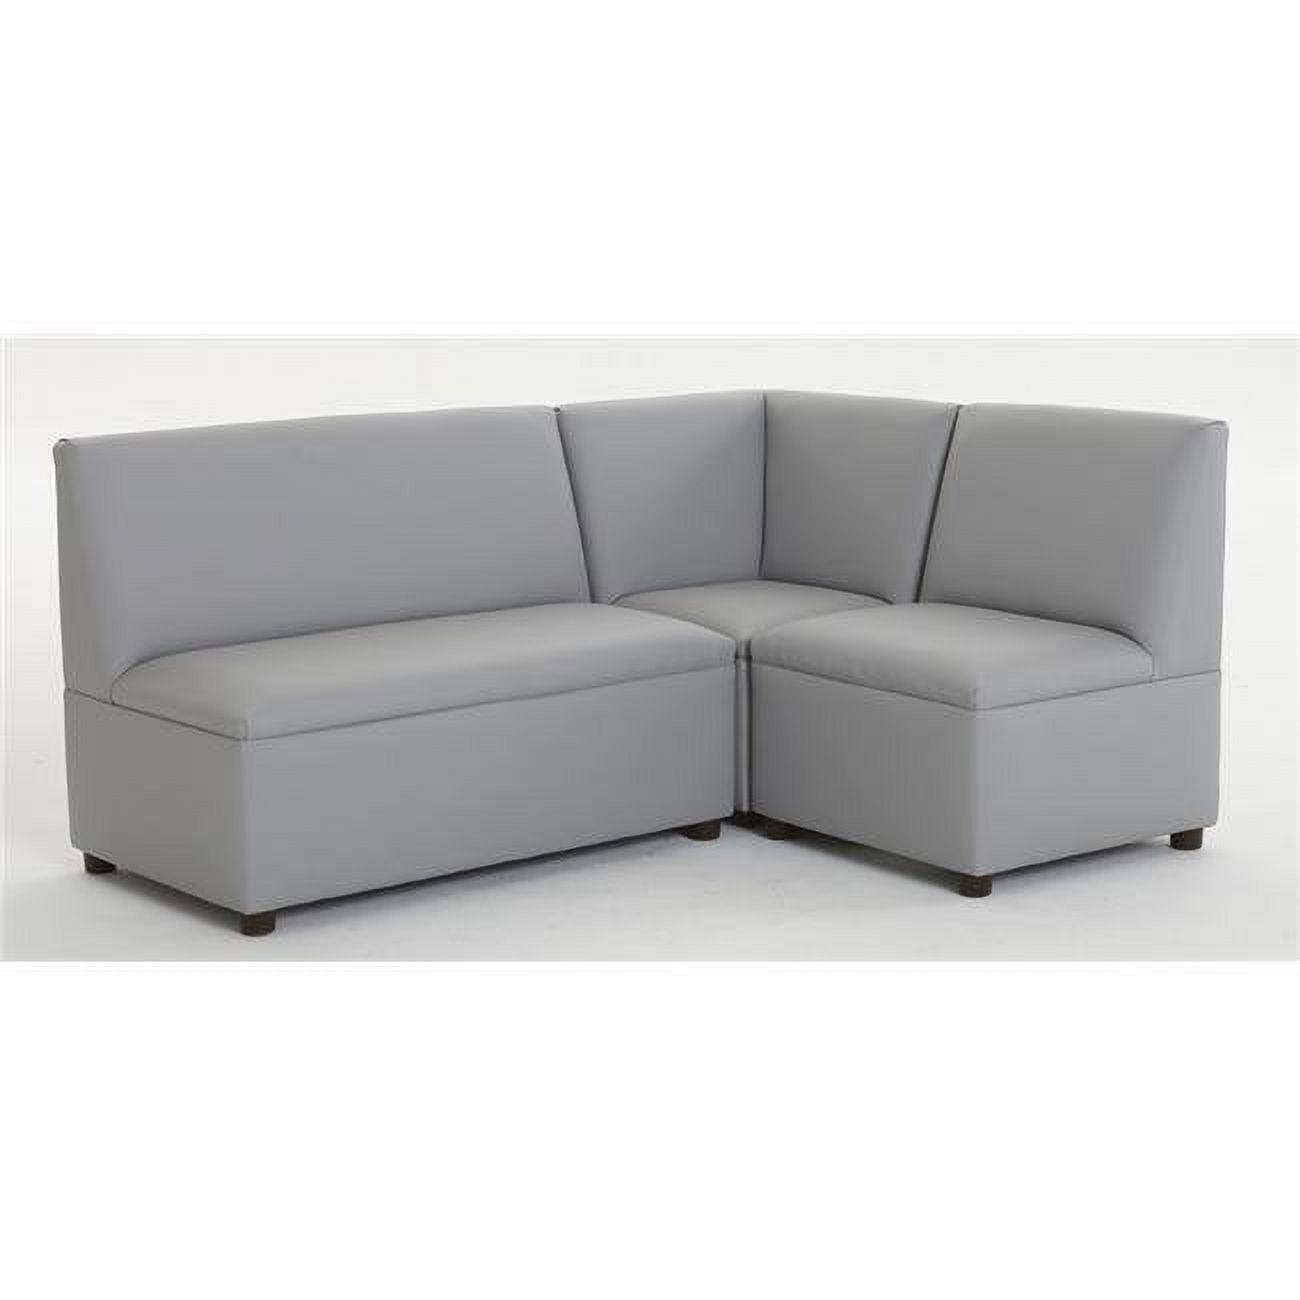 Picture of Brand New World FM0260-Group3 Modern Casual Set, Gray - 3 Piece